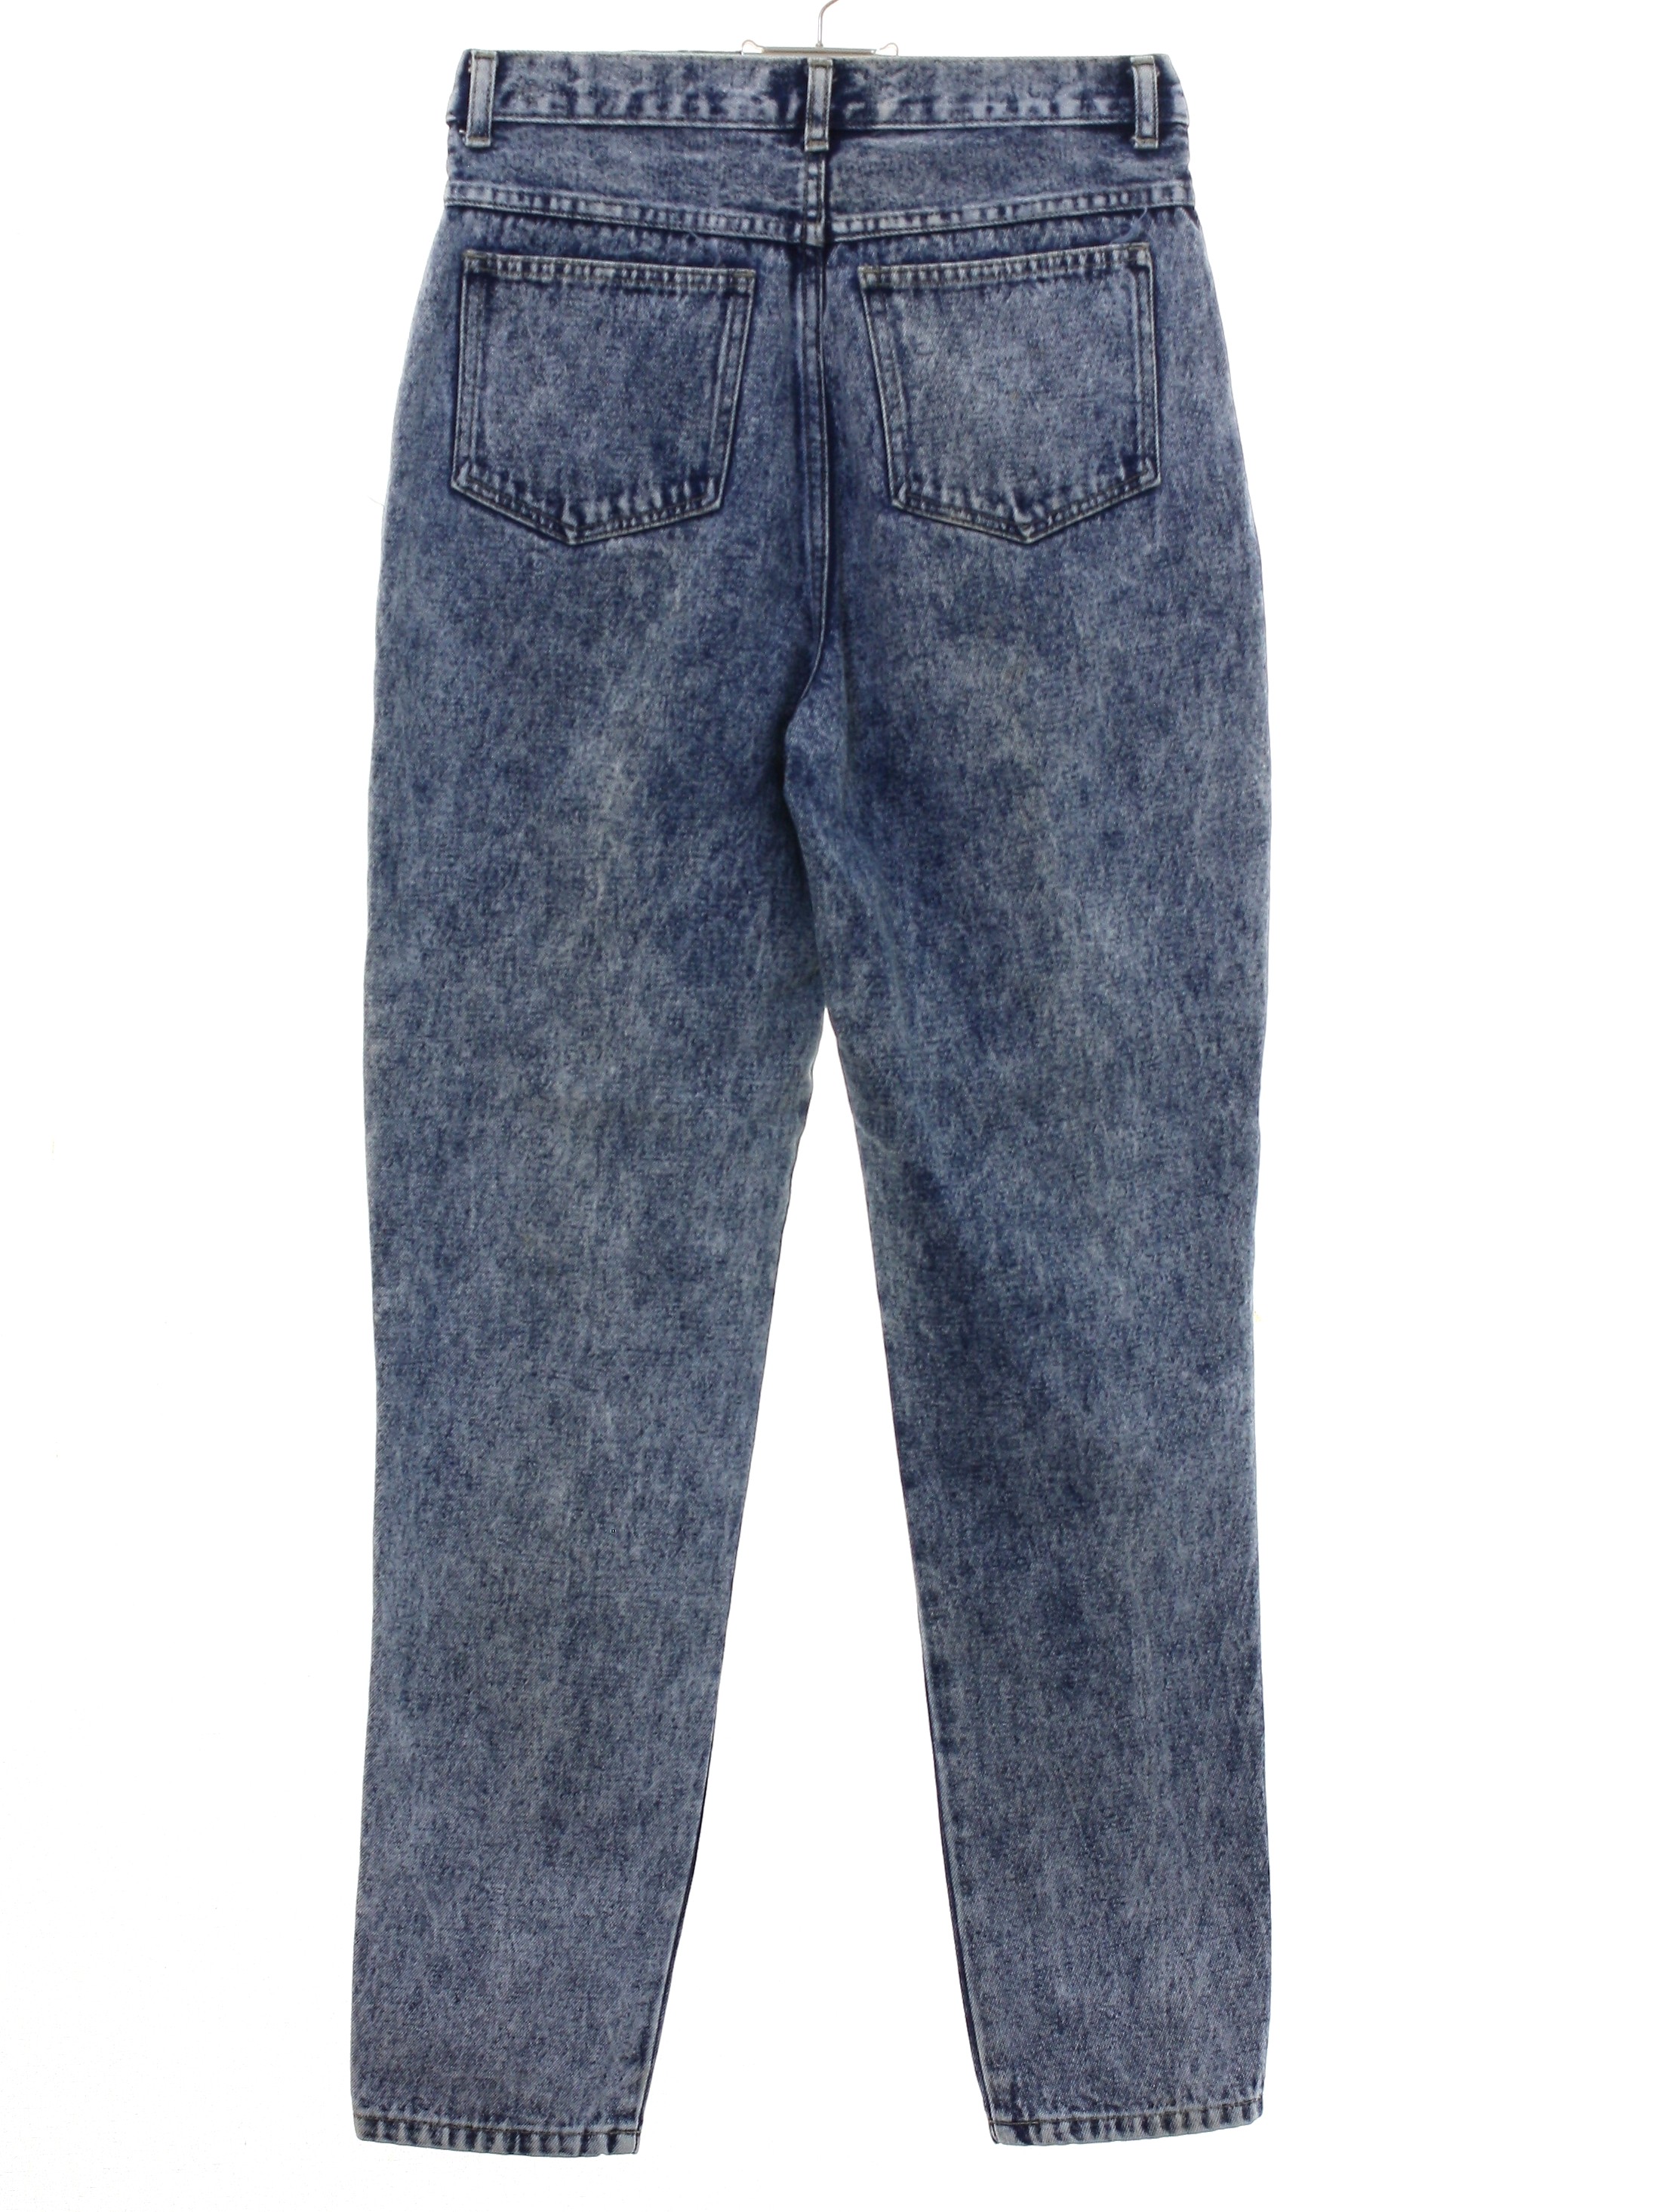 Retro 80s Pants (Stefano) : 80s Style (made in 90s) -Stefano- Womens acid  washed hazy blue cotton tapered legs totally 80s style denim jeans pants  with zipper fly closure with button. Five